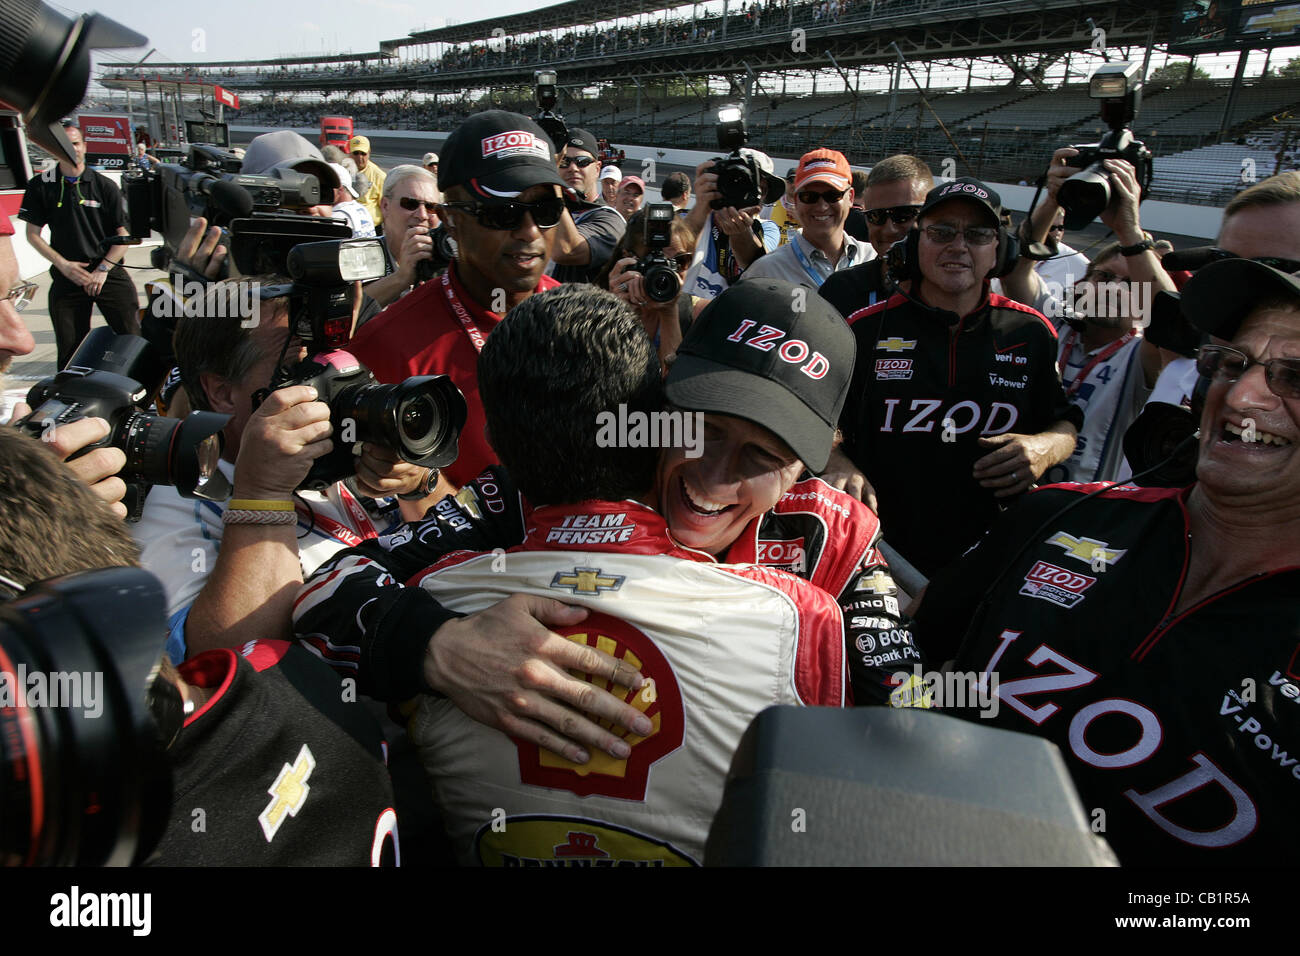 May 19, 2012 - Indianapolis, Indiana, U.S - IZOD Indycar Series, Indy 500, Indianapolis, IN, Qualifying, Practice, May 18-27 2012, RYAN BRISCOE IZOD Team Penske Chevrolet, Pole Winner, Celebration, HELIO CASTRONEVES Shell V-Power/Pennzoil Ultra Team Penske Chevrolet  (Credit Image: © Ron Bijlsma/ZUM Stock Photo